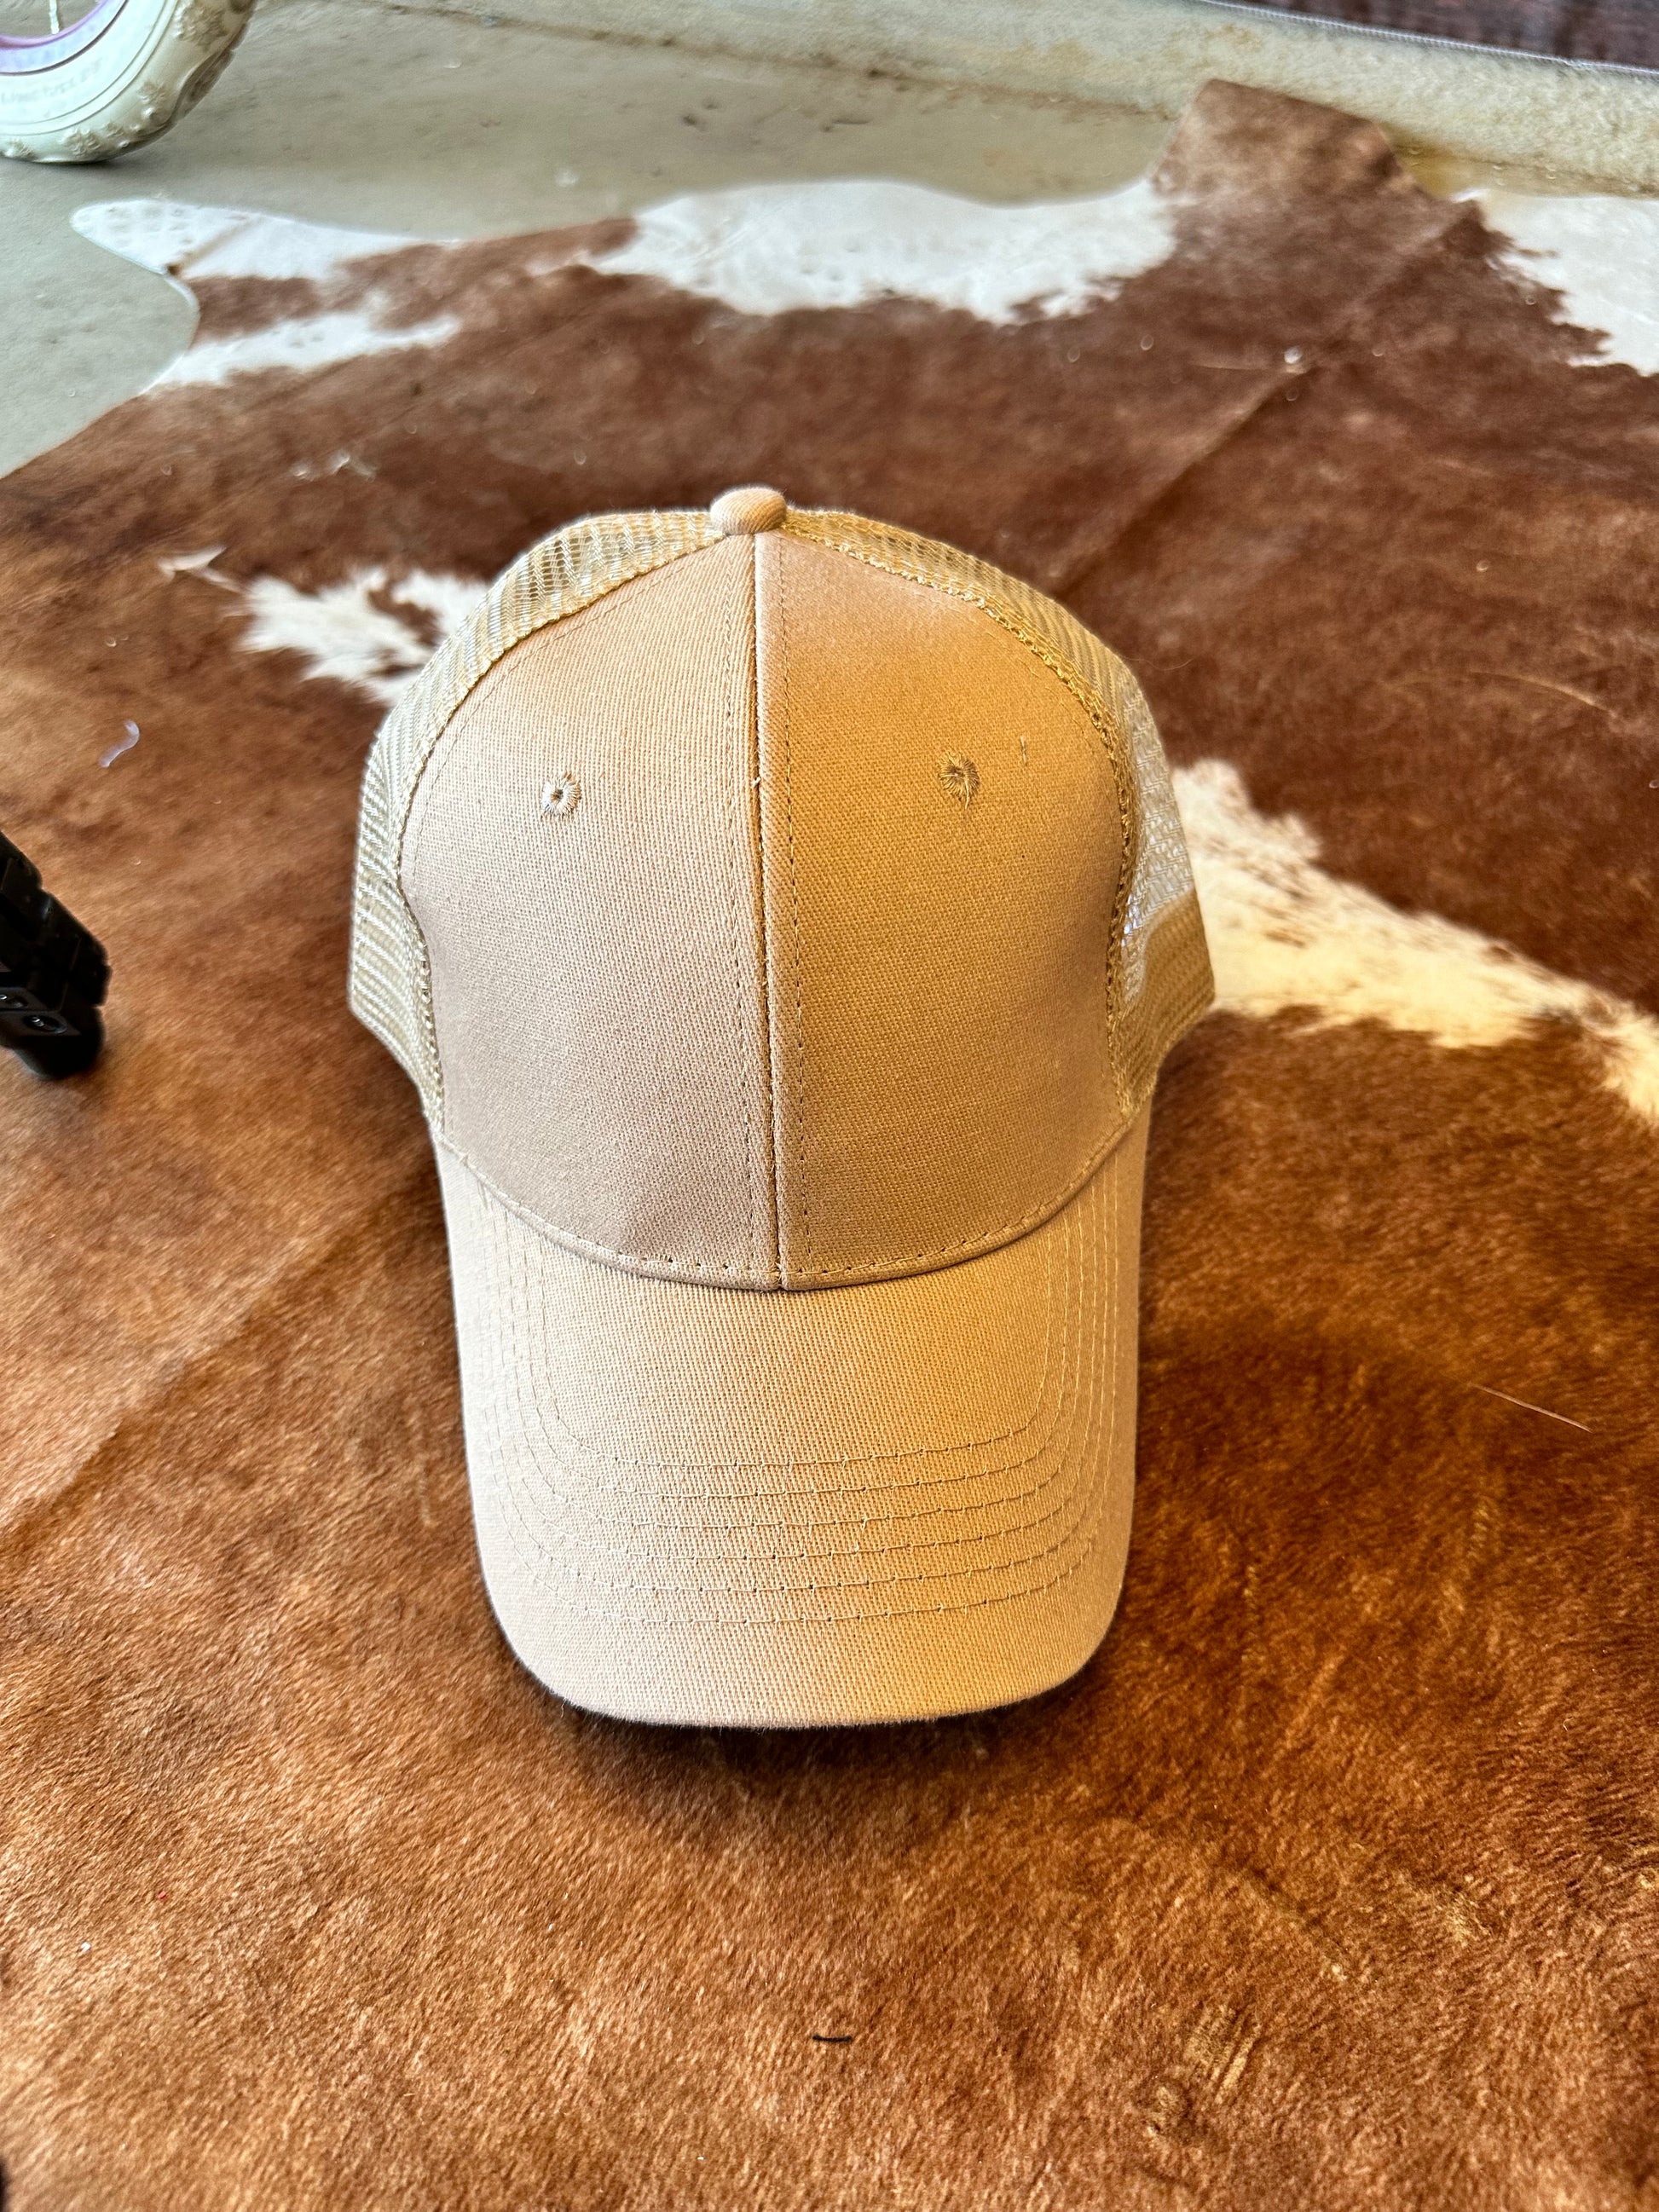 Khaki ball cap with structured crown and mesh back